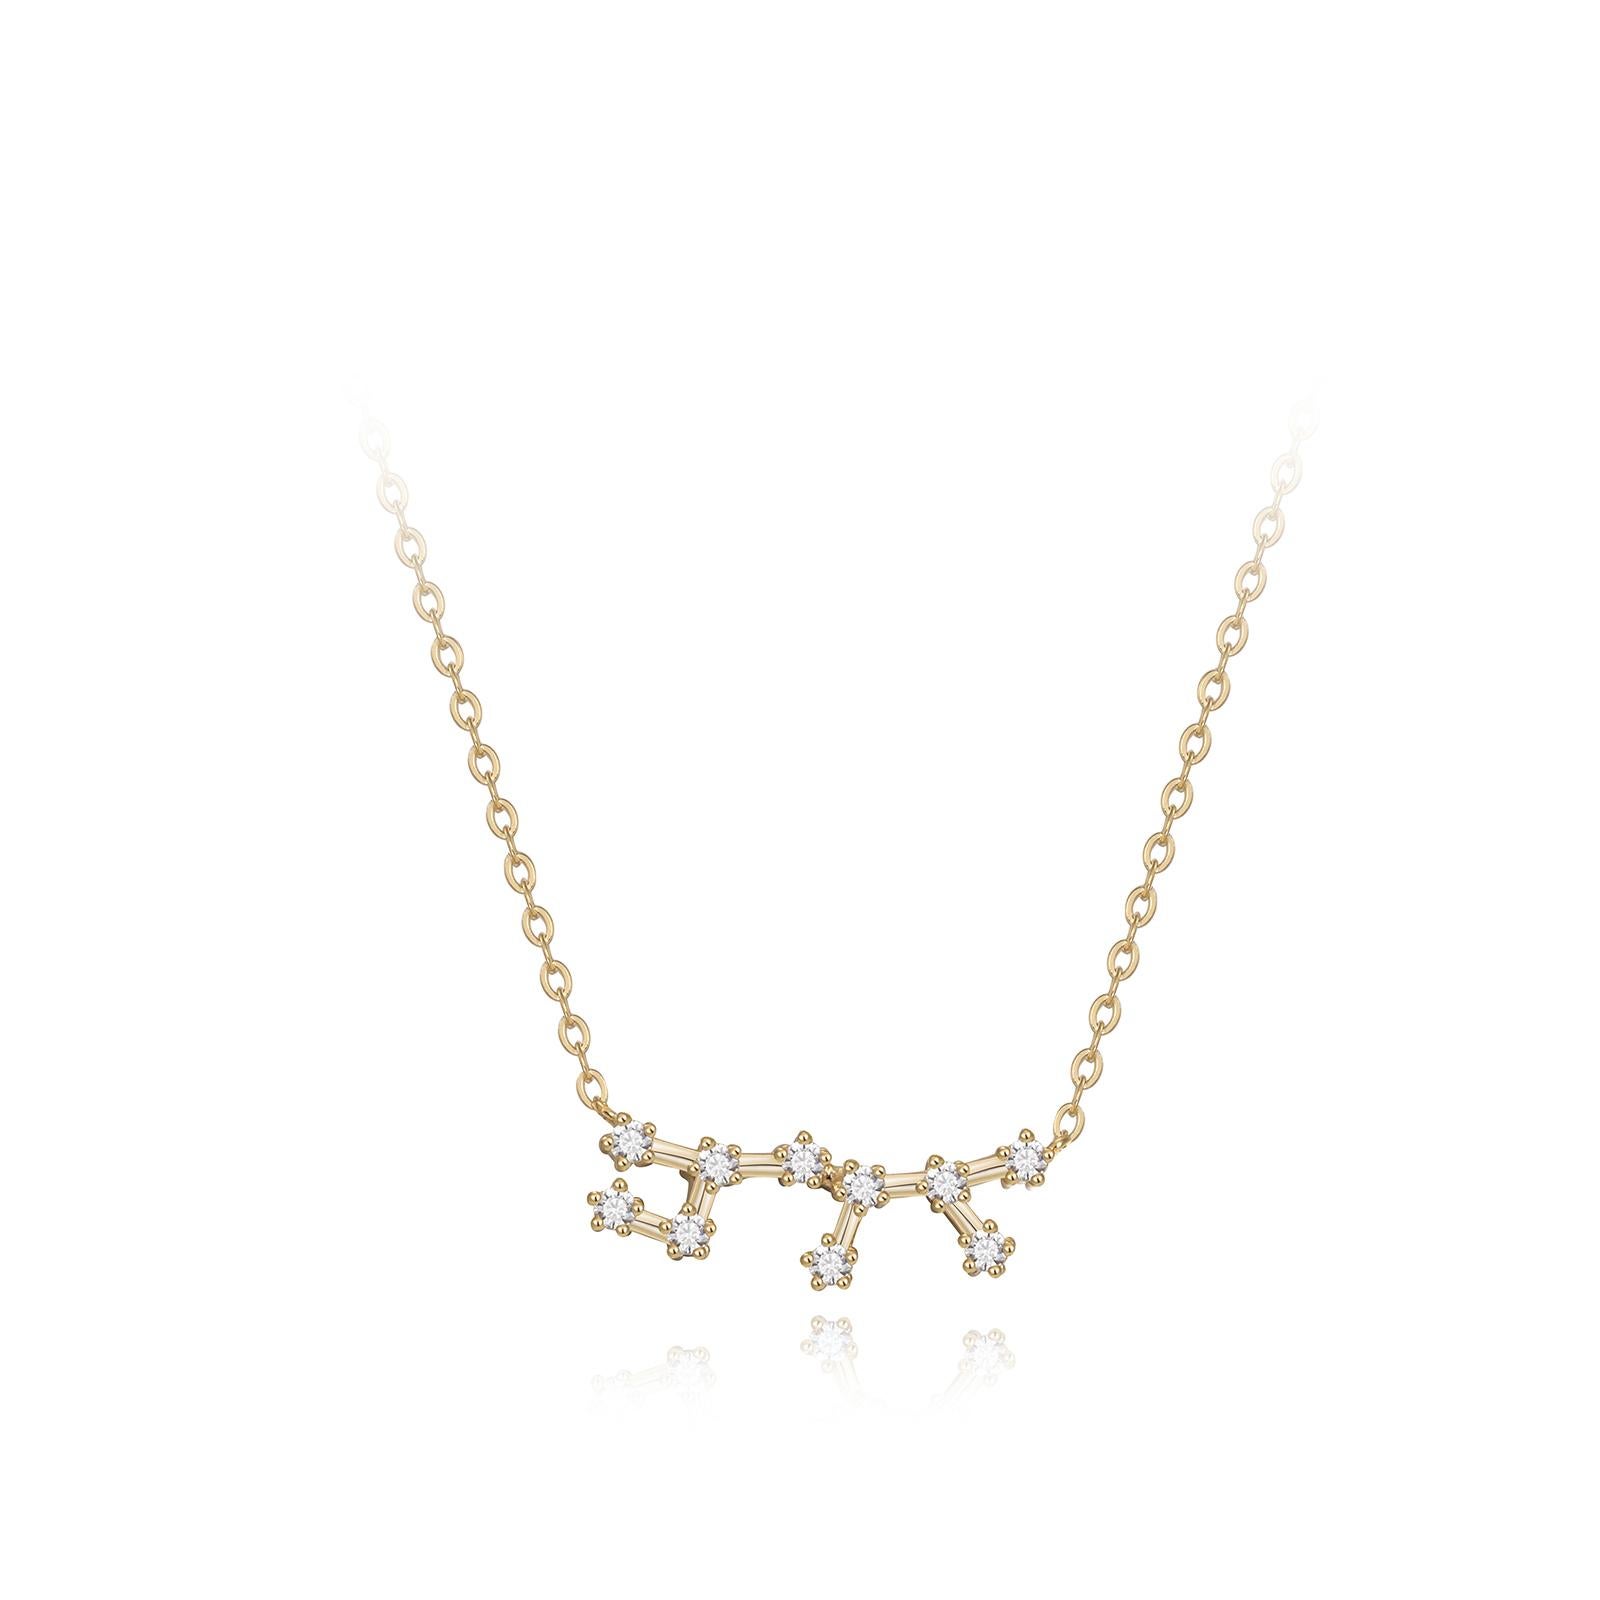 You are unique and your zodiac tells part of your story.  How your zodiac is displayed in the beautiful nighttime sky is what we want you to carry with you always. This sagittarius constellation necklace shares a part of your personality with us all